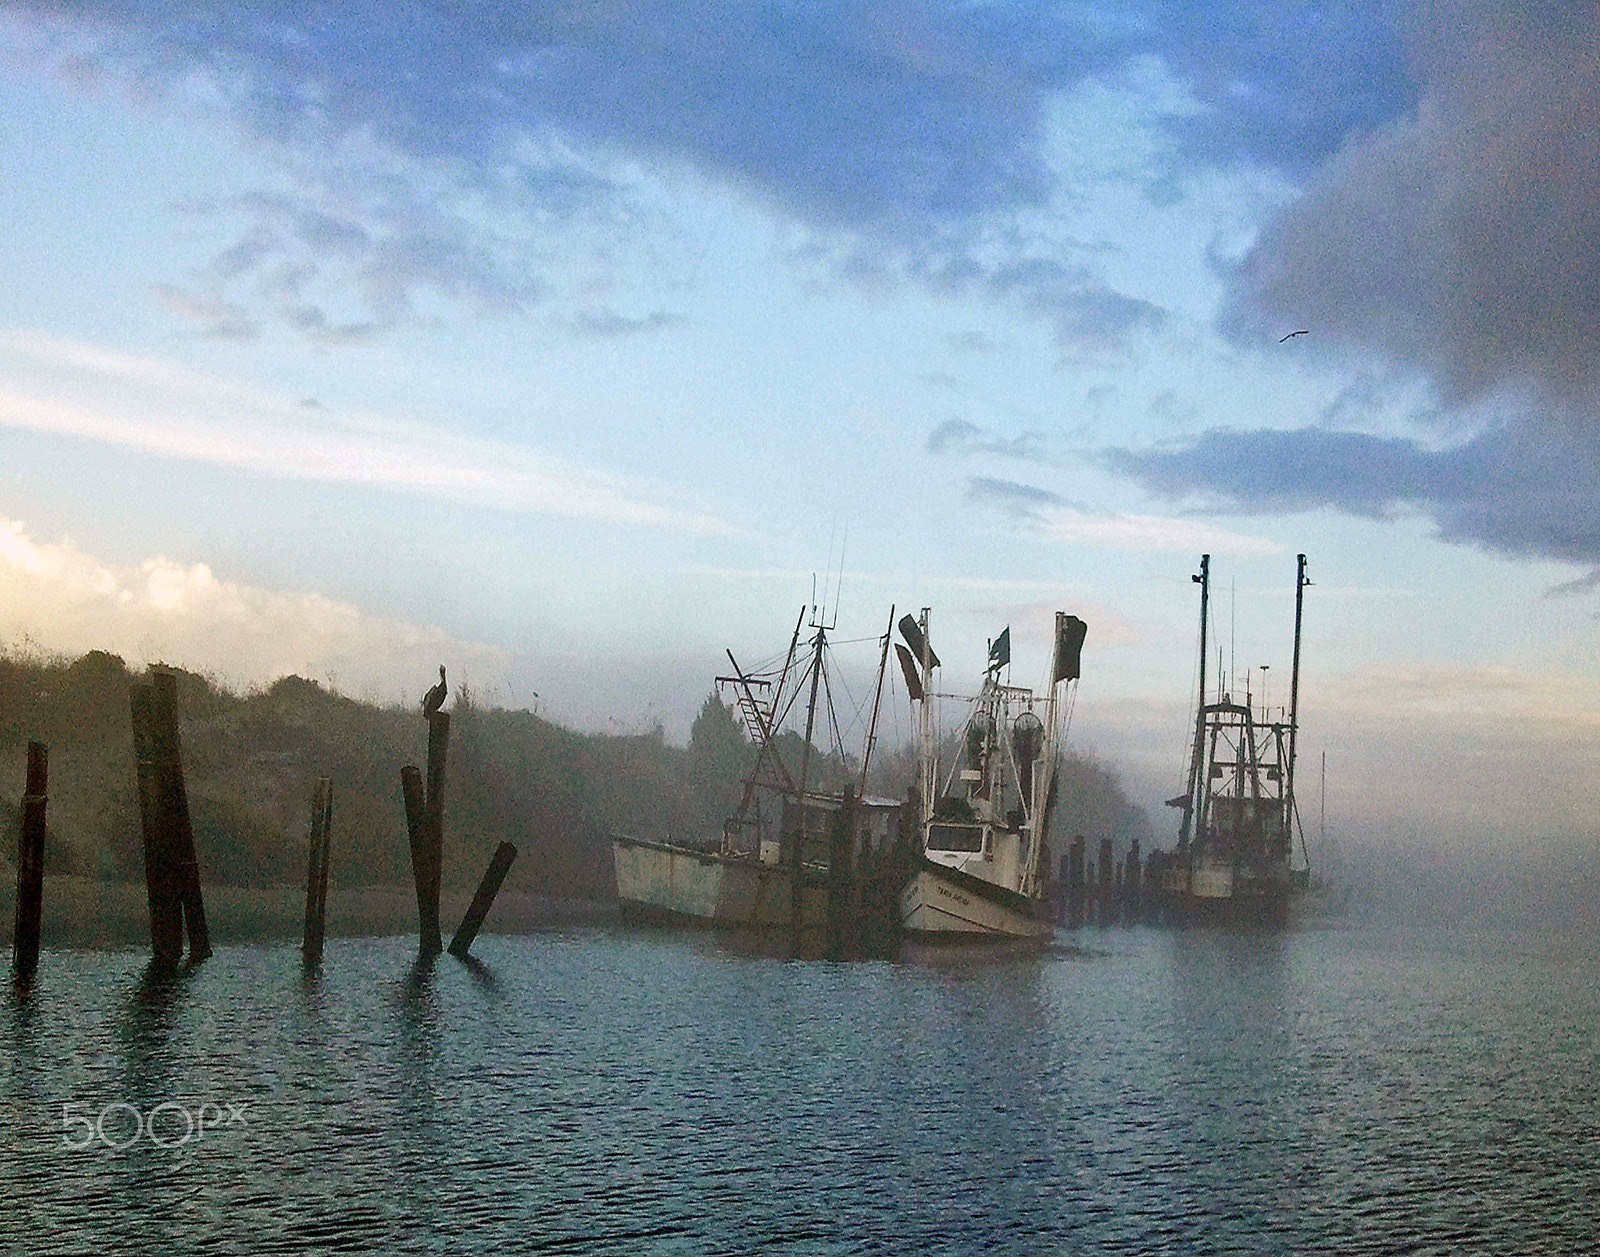 Samsung Galaxy S sample photo. Shrimp boats in the mist photography